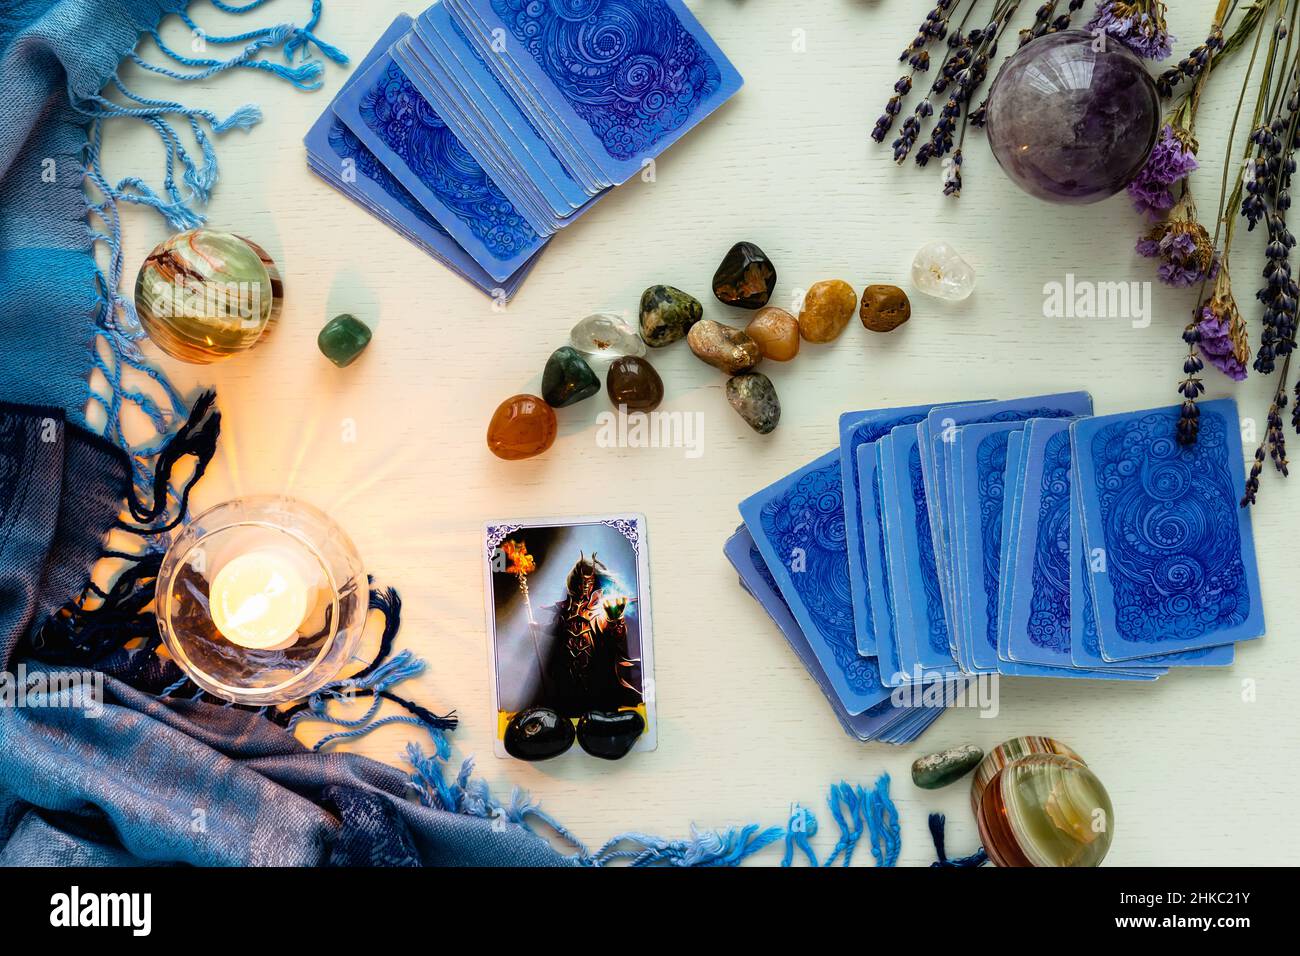 Minsk, Belarus - February 2022: Devil cards in tarot divination with candles and stones on a light table with dried flowers and a blue tablecloth. Mag Stock Photo